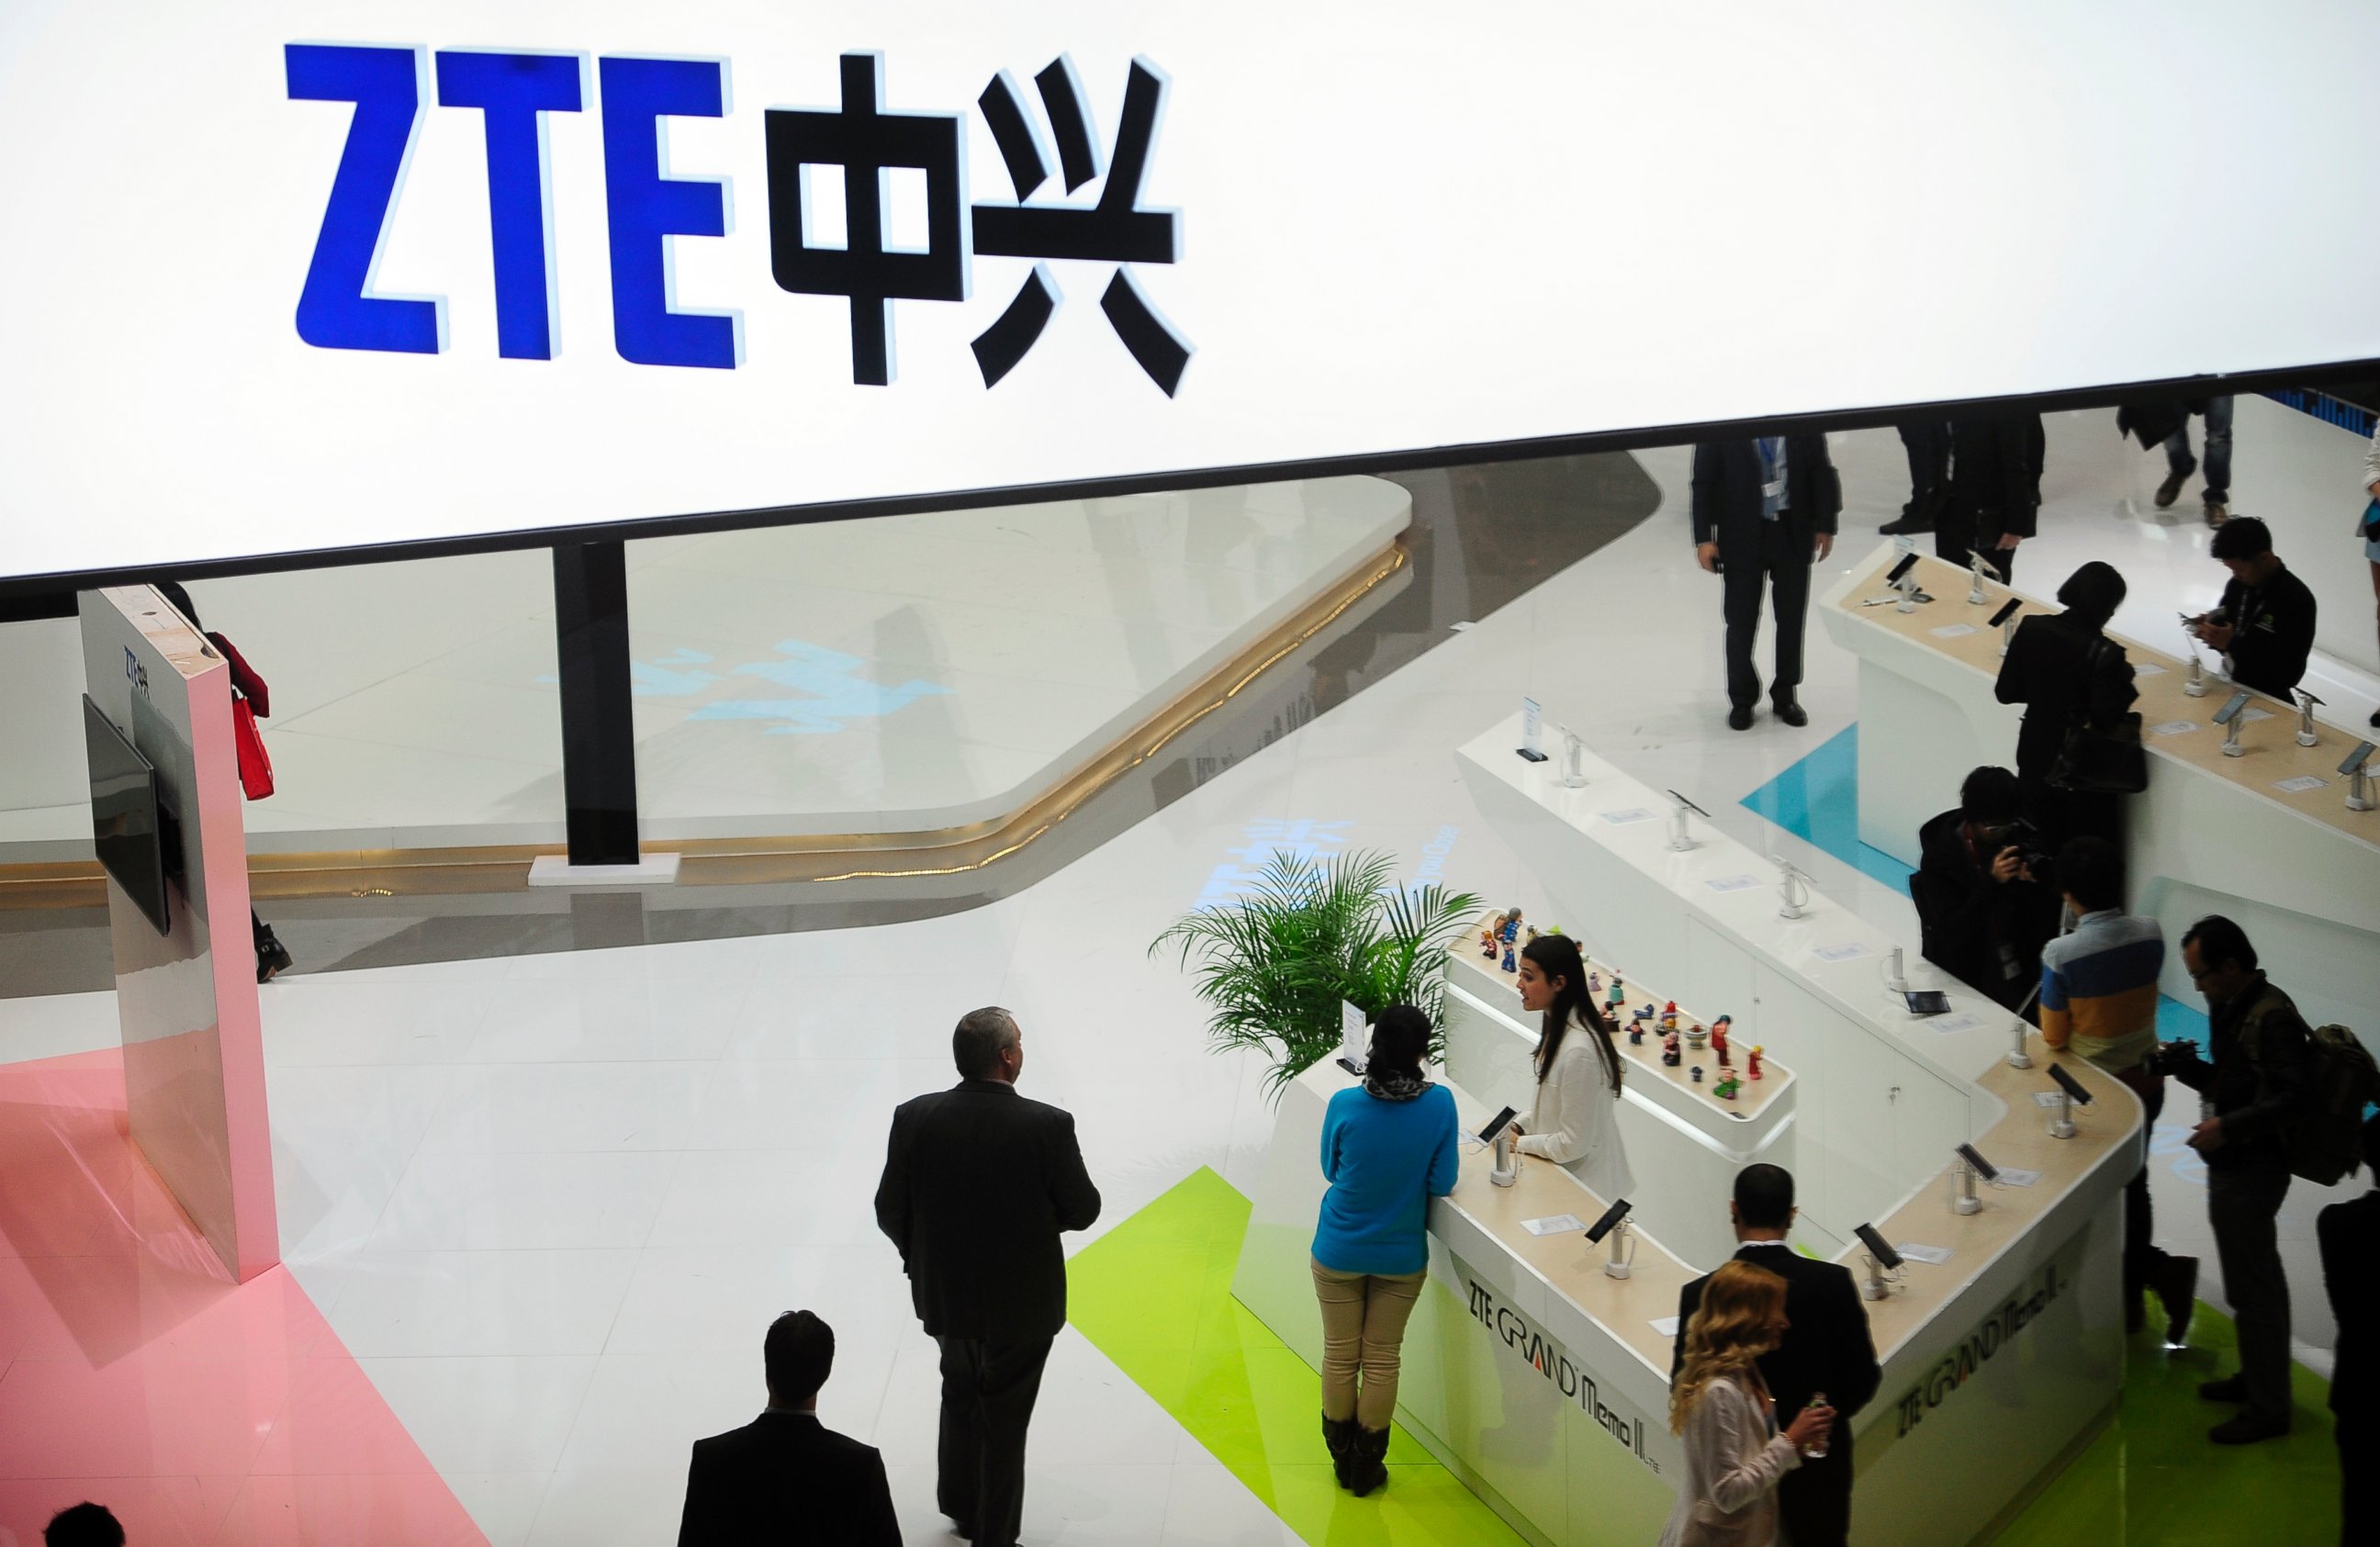 In this Wednesday, Feb. 26, 2014, file photo, people gather at the ZTE booth at the Mobile World Congress, the world's largest mobile phone trade show in Barcelona, Spain.